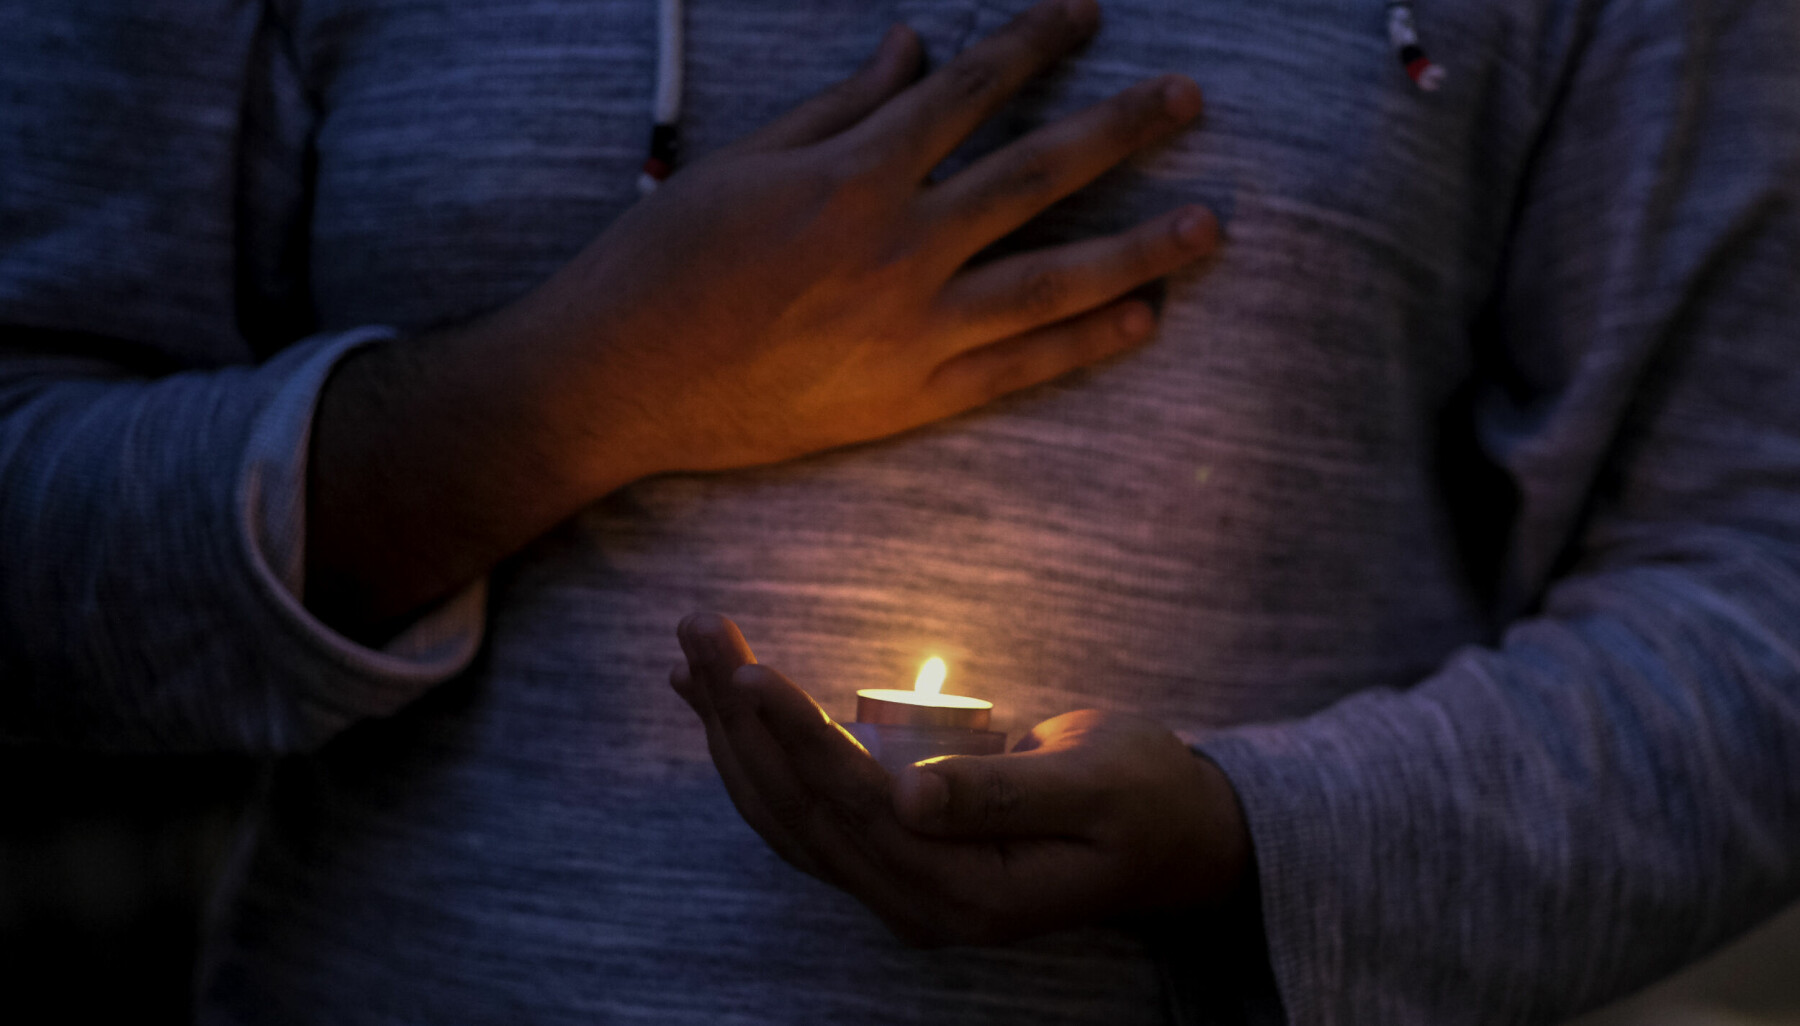 March 1, 2022, Los Angeles, California, USA: A student holds a candlelight during a vigil in support of Ukraine at University of Southern California in Los Angeles on March 1, 2022.